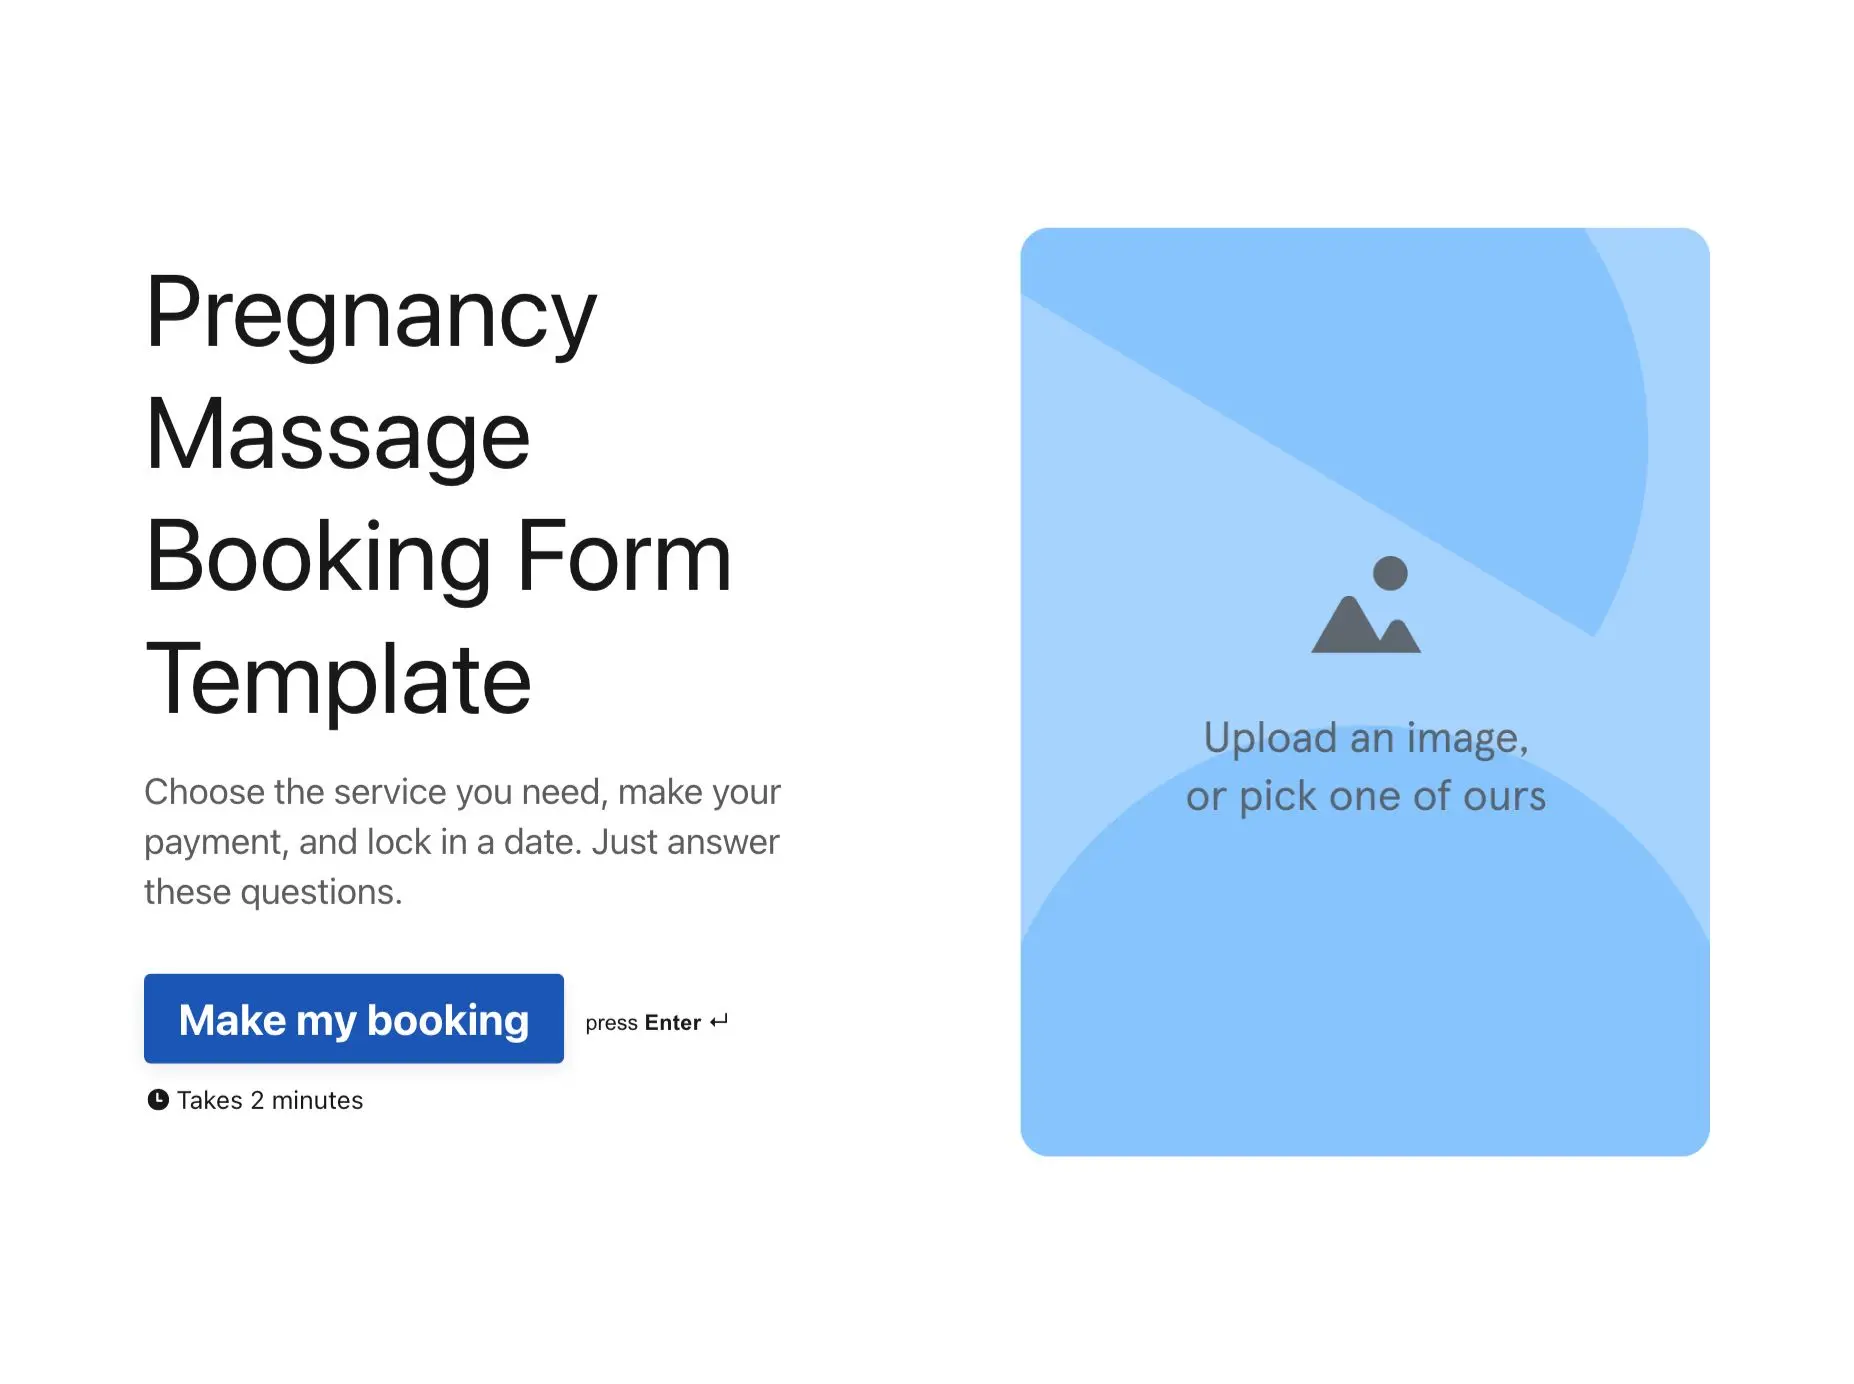 Pregnancy Massage Booking Form Template Hero